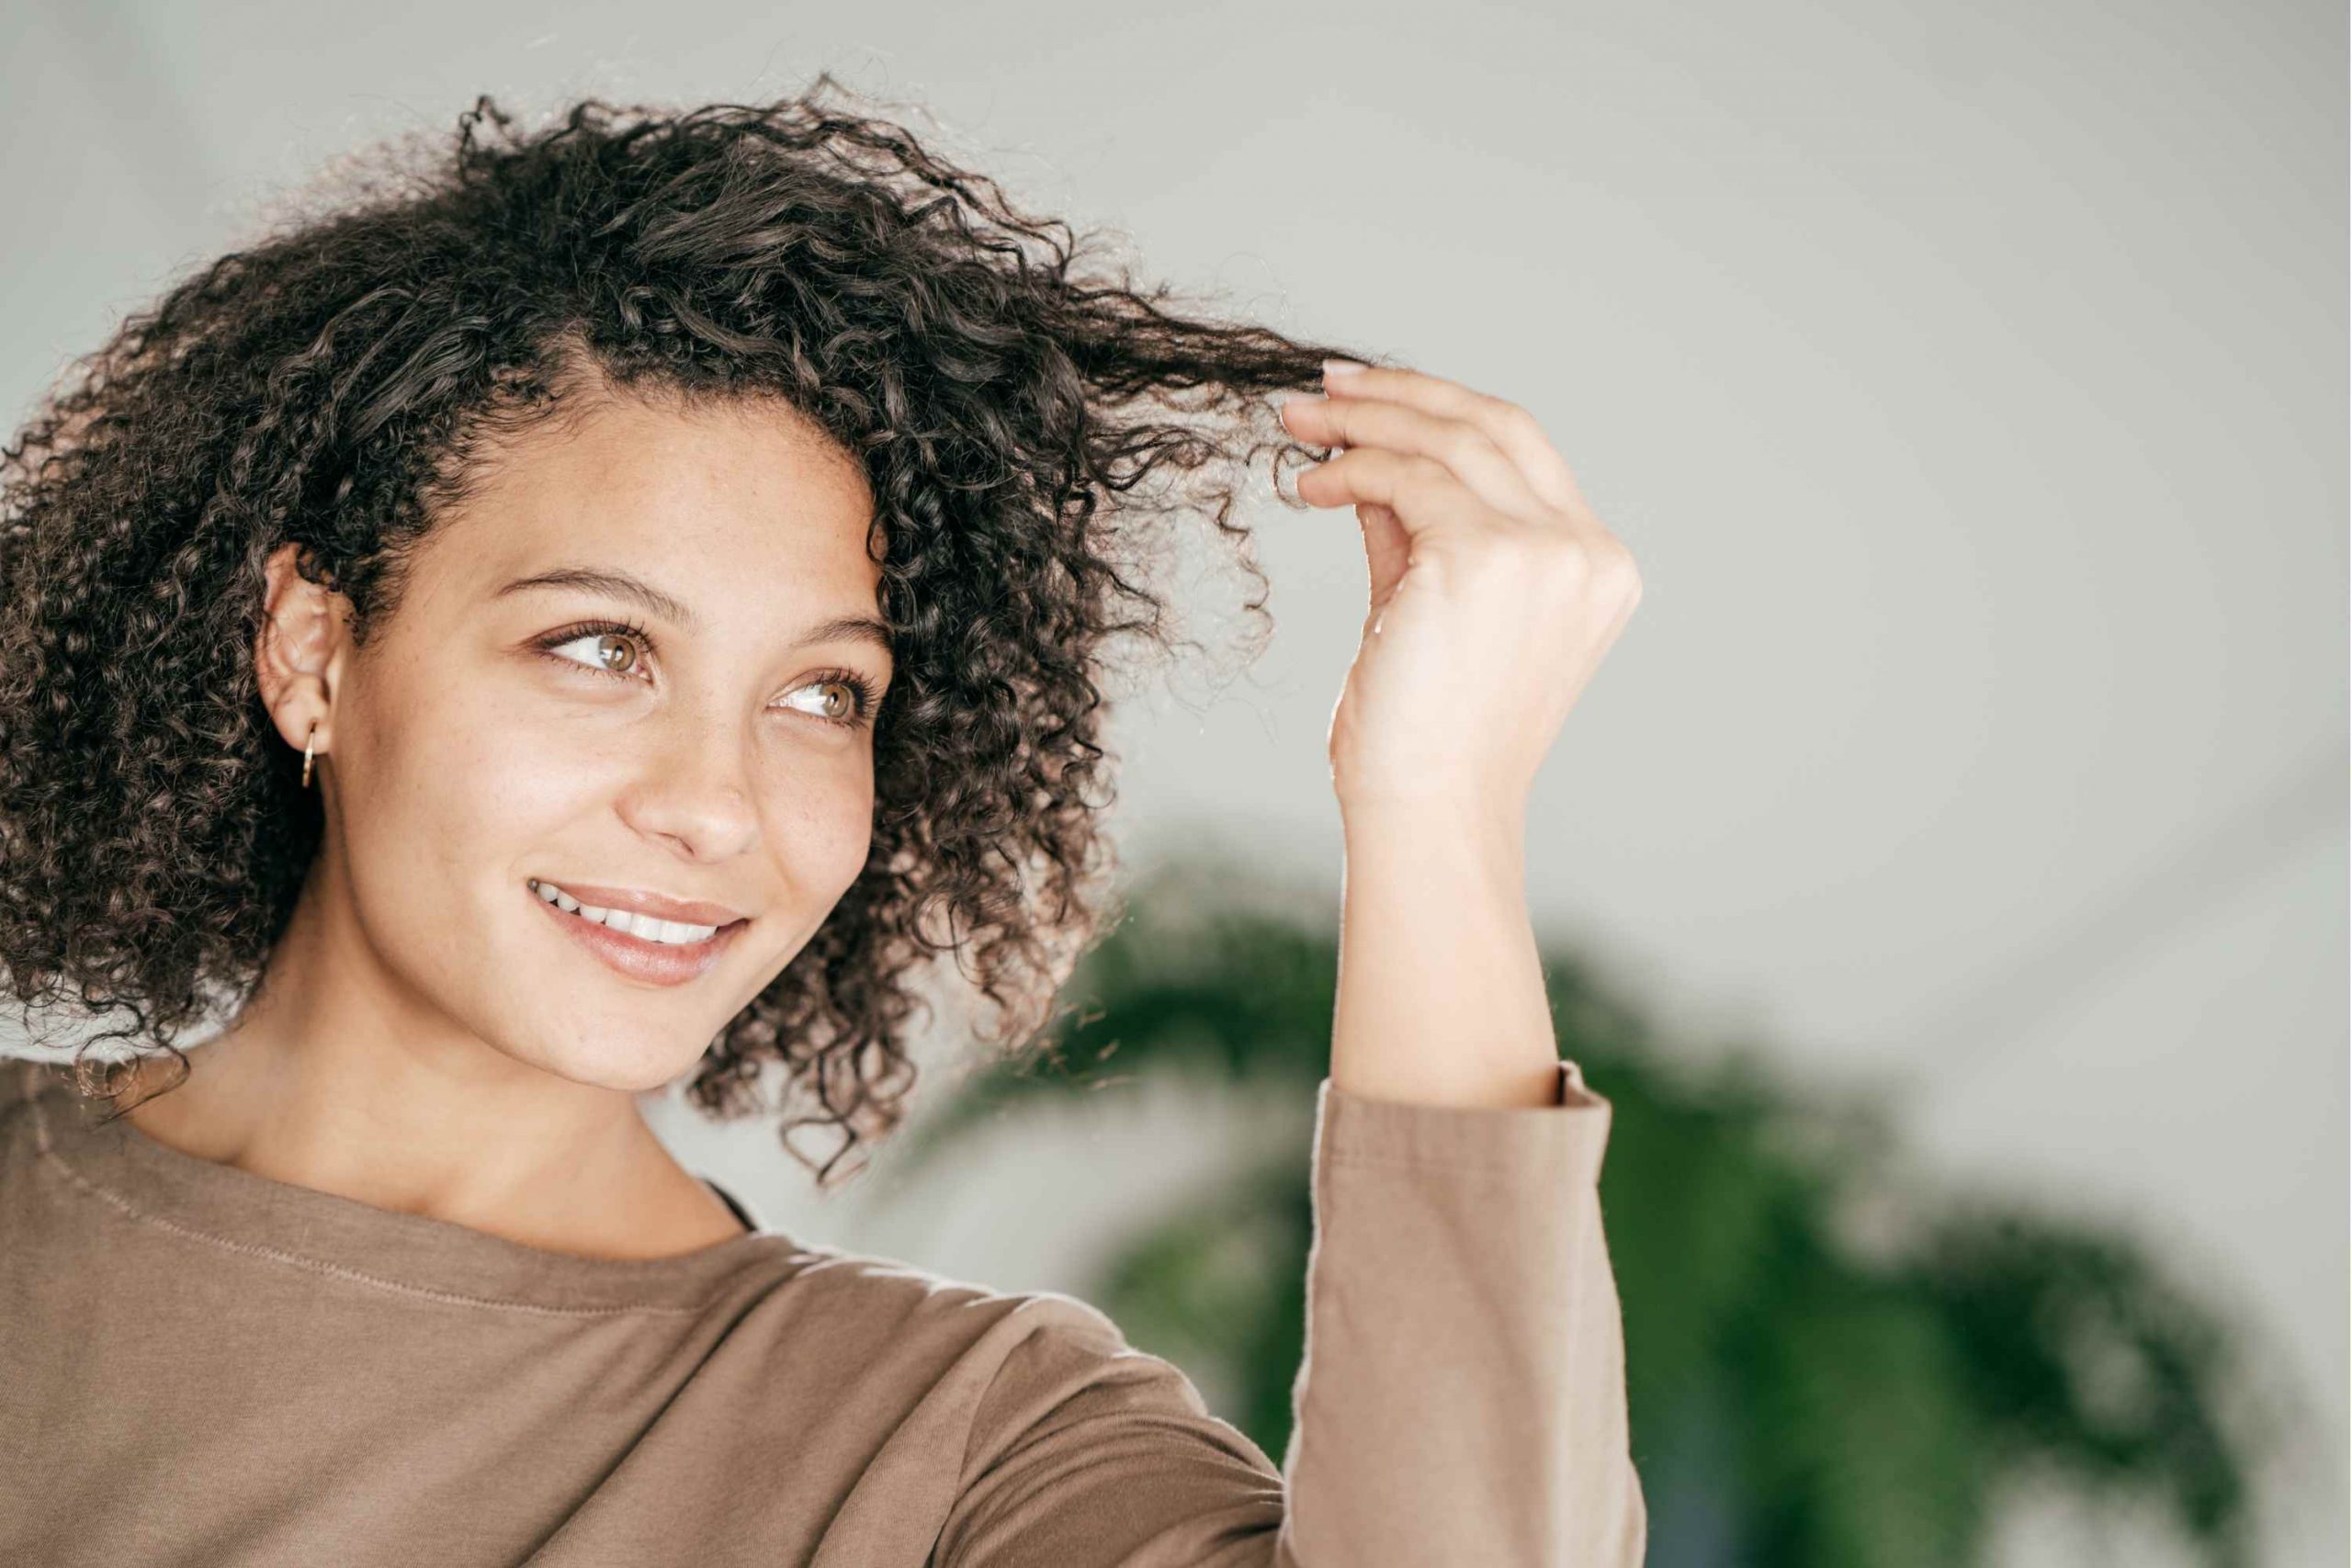 Hair Care Tips to Prevent Your Locks From Getting Green